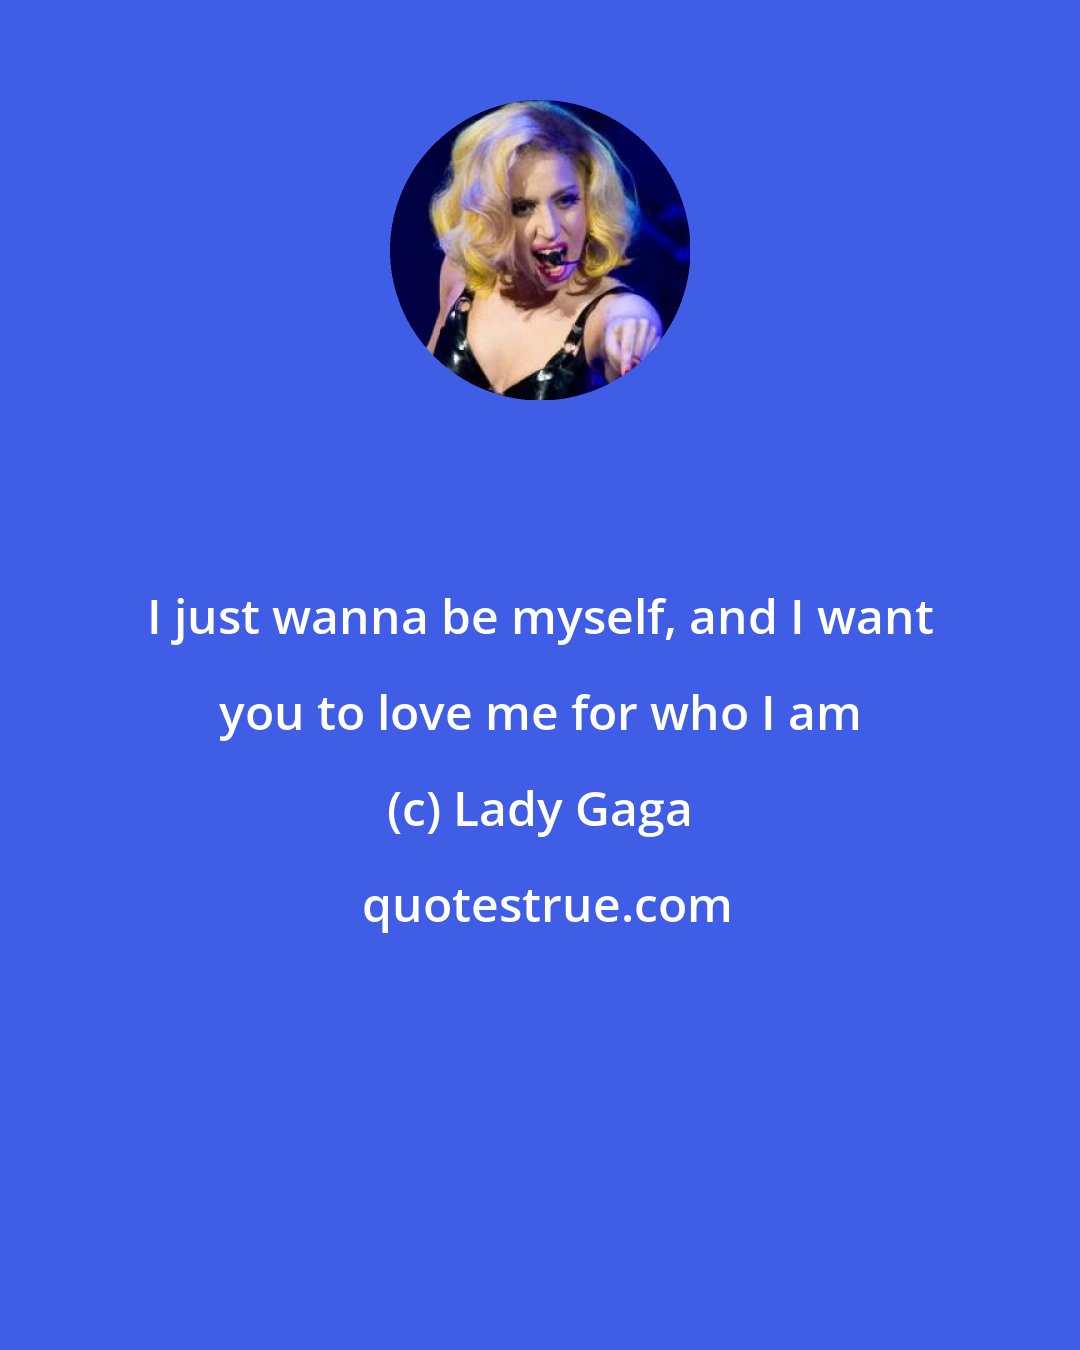 Lady Gaga: I just wanna be myself, and I want you to love me for who I am